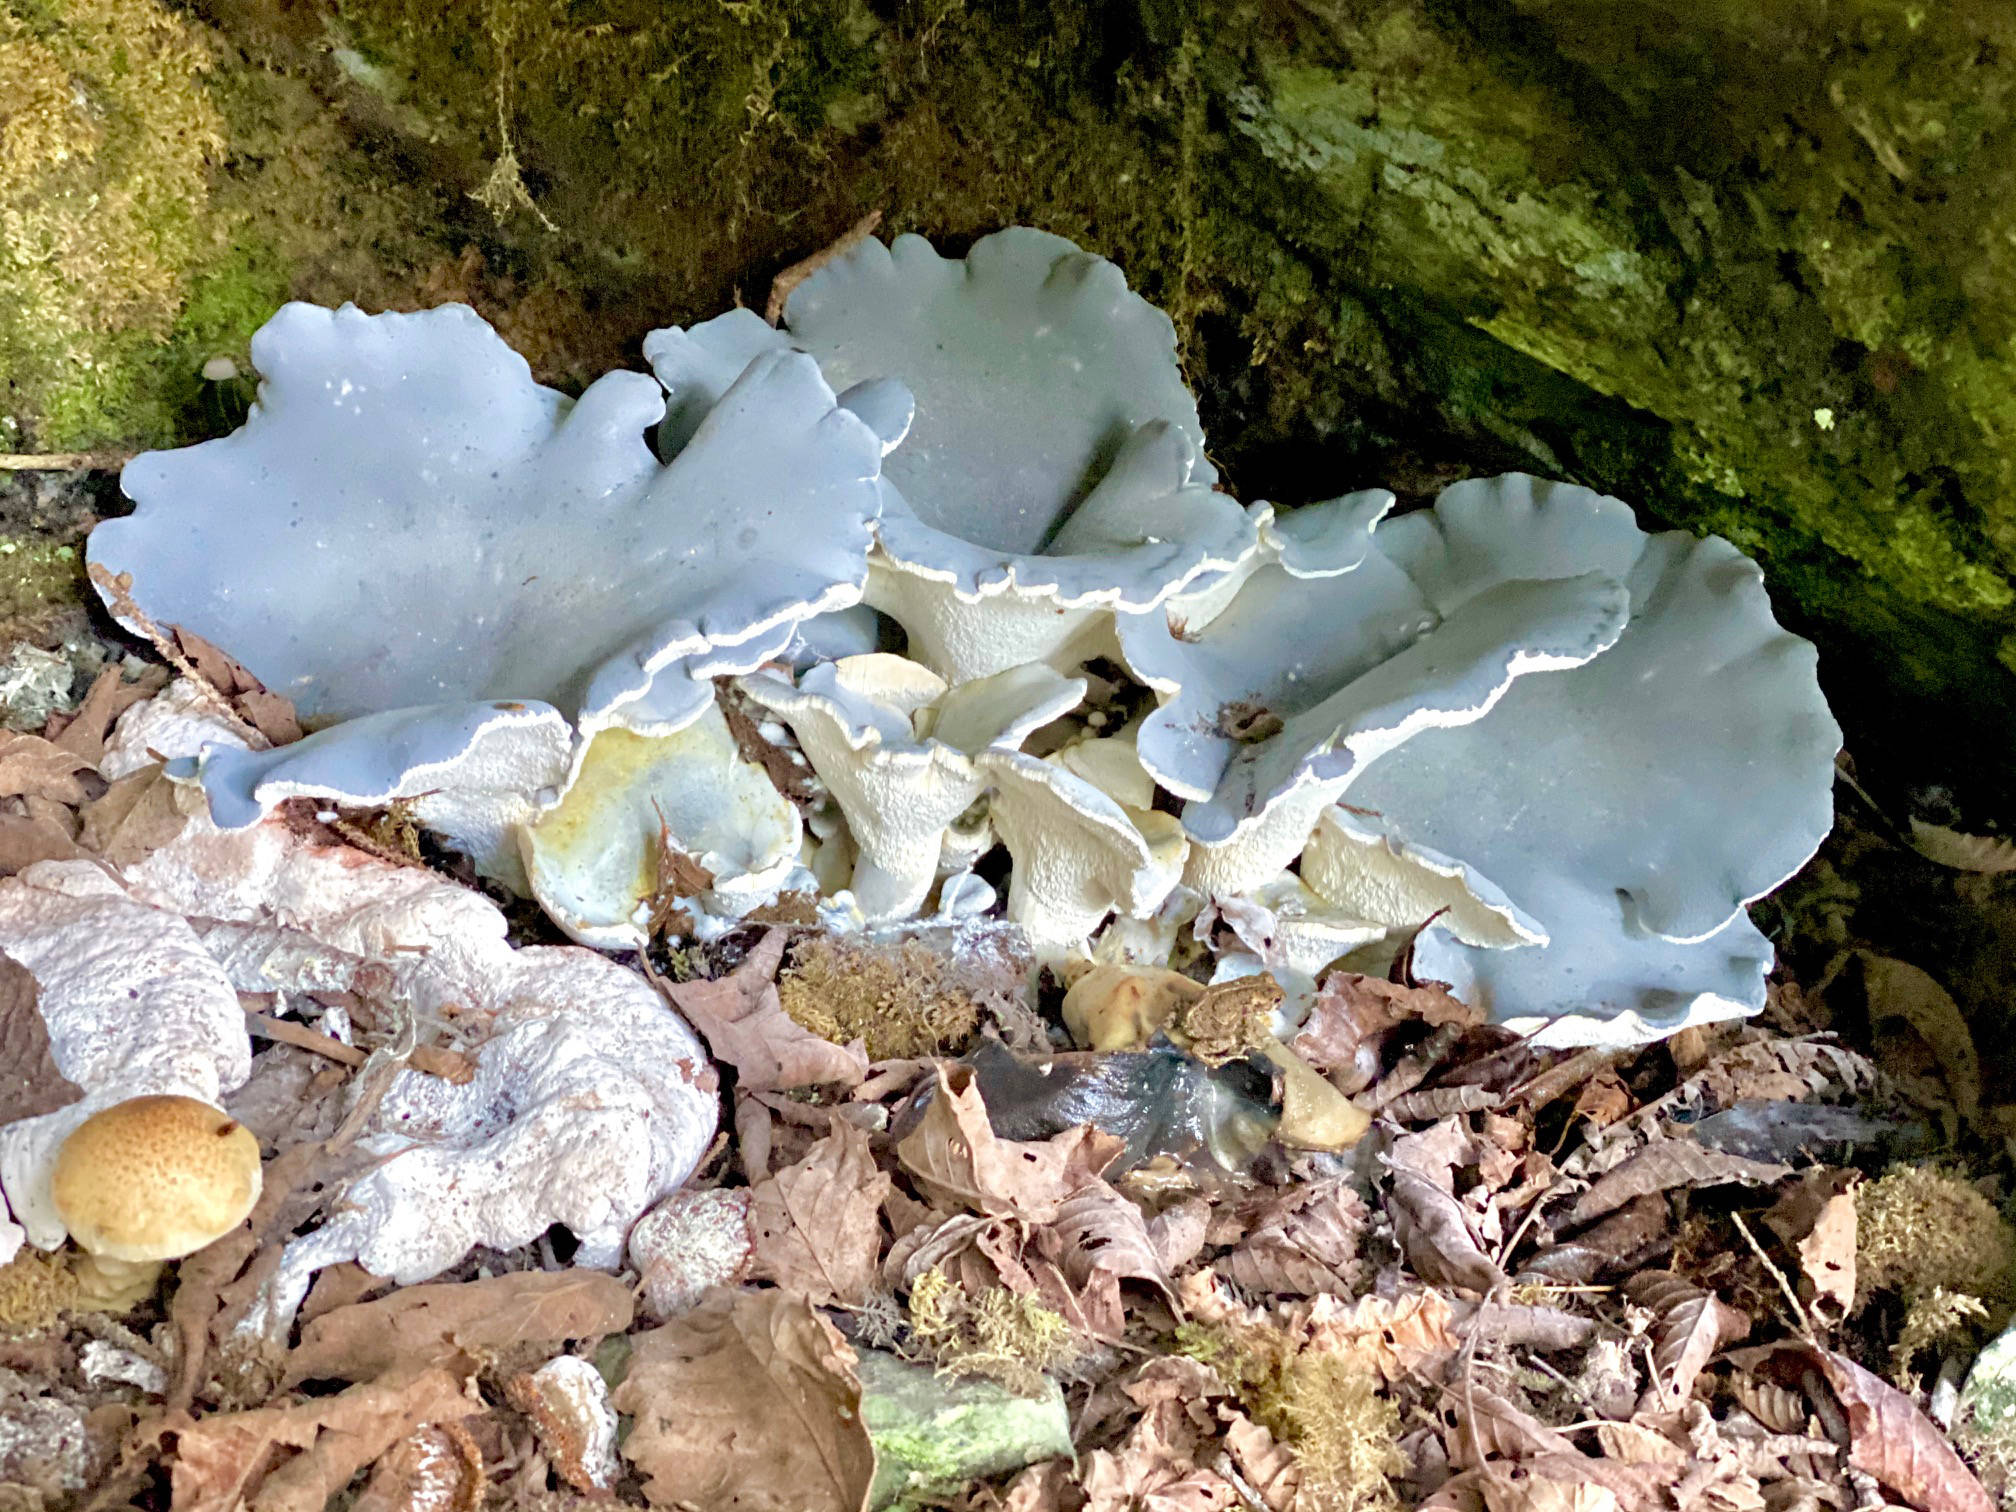 A small colony of intricate mushrooms commonly, but not officially, called blue knight or blue denim mushrooms as seen on the trail to Akiyama Bight on Aug. 7, 2020. (Courtesy Photo / Denise Carroll)